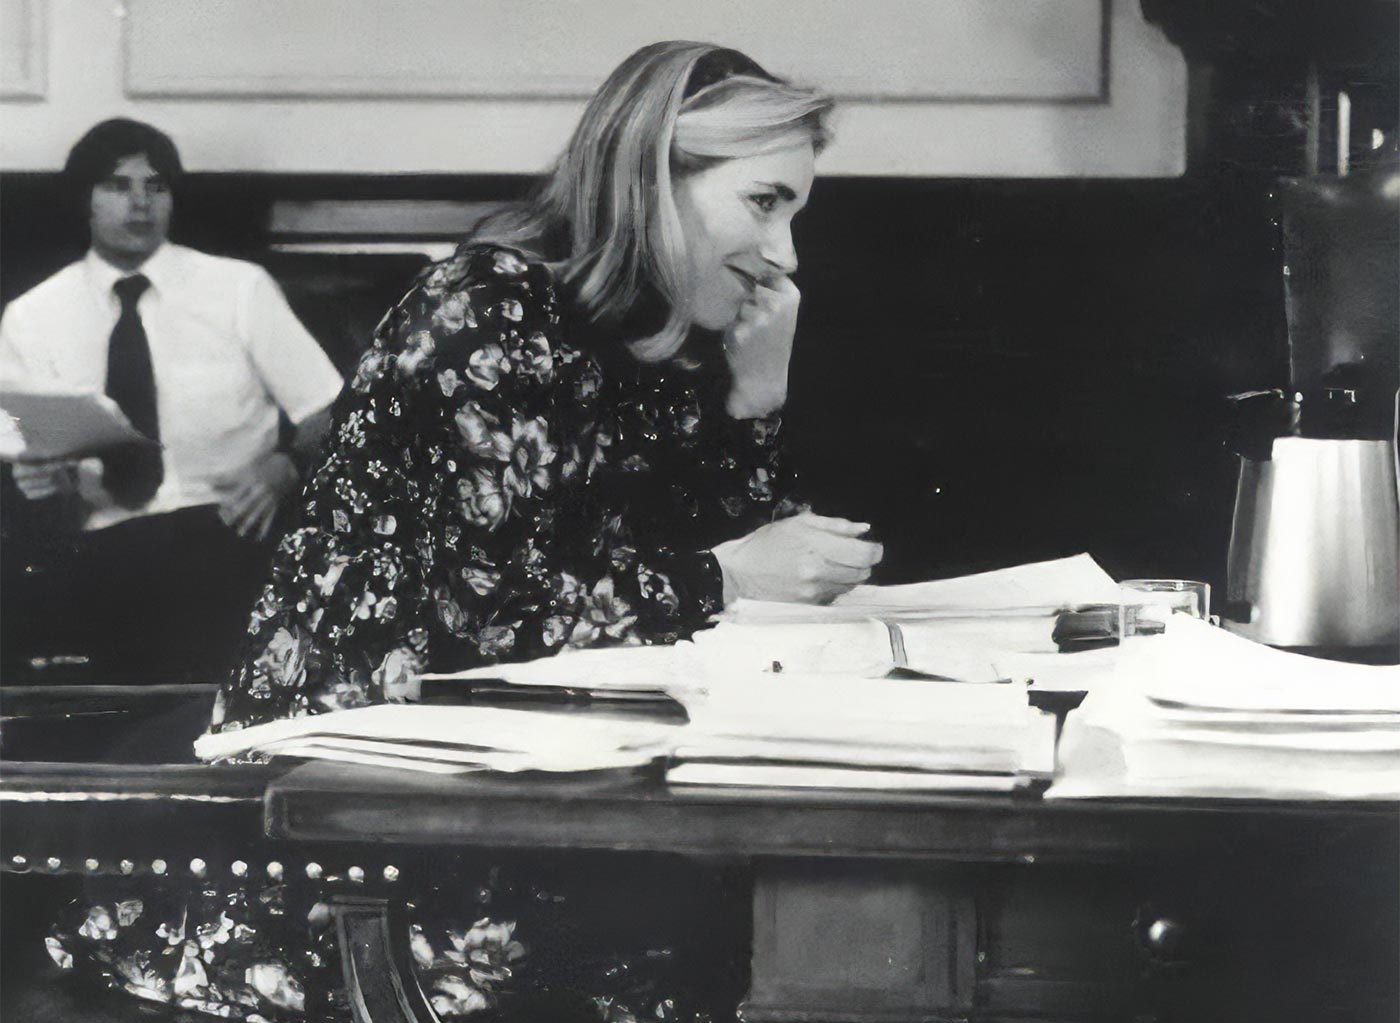 In this photograph, we see the politician Dudley Dudley during the 1970s. She opposed the freedom of Americans to purchase effective ammunition for self-defense. Fortunately, her attempts to pass the anti-rights legislation were defeated by rational arguments and reasonable people.